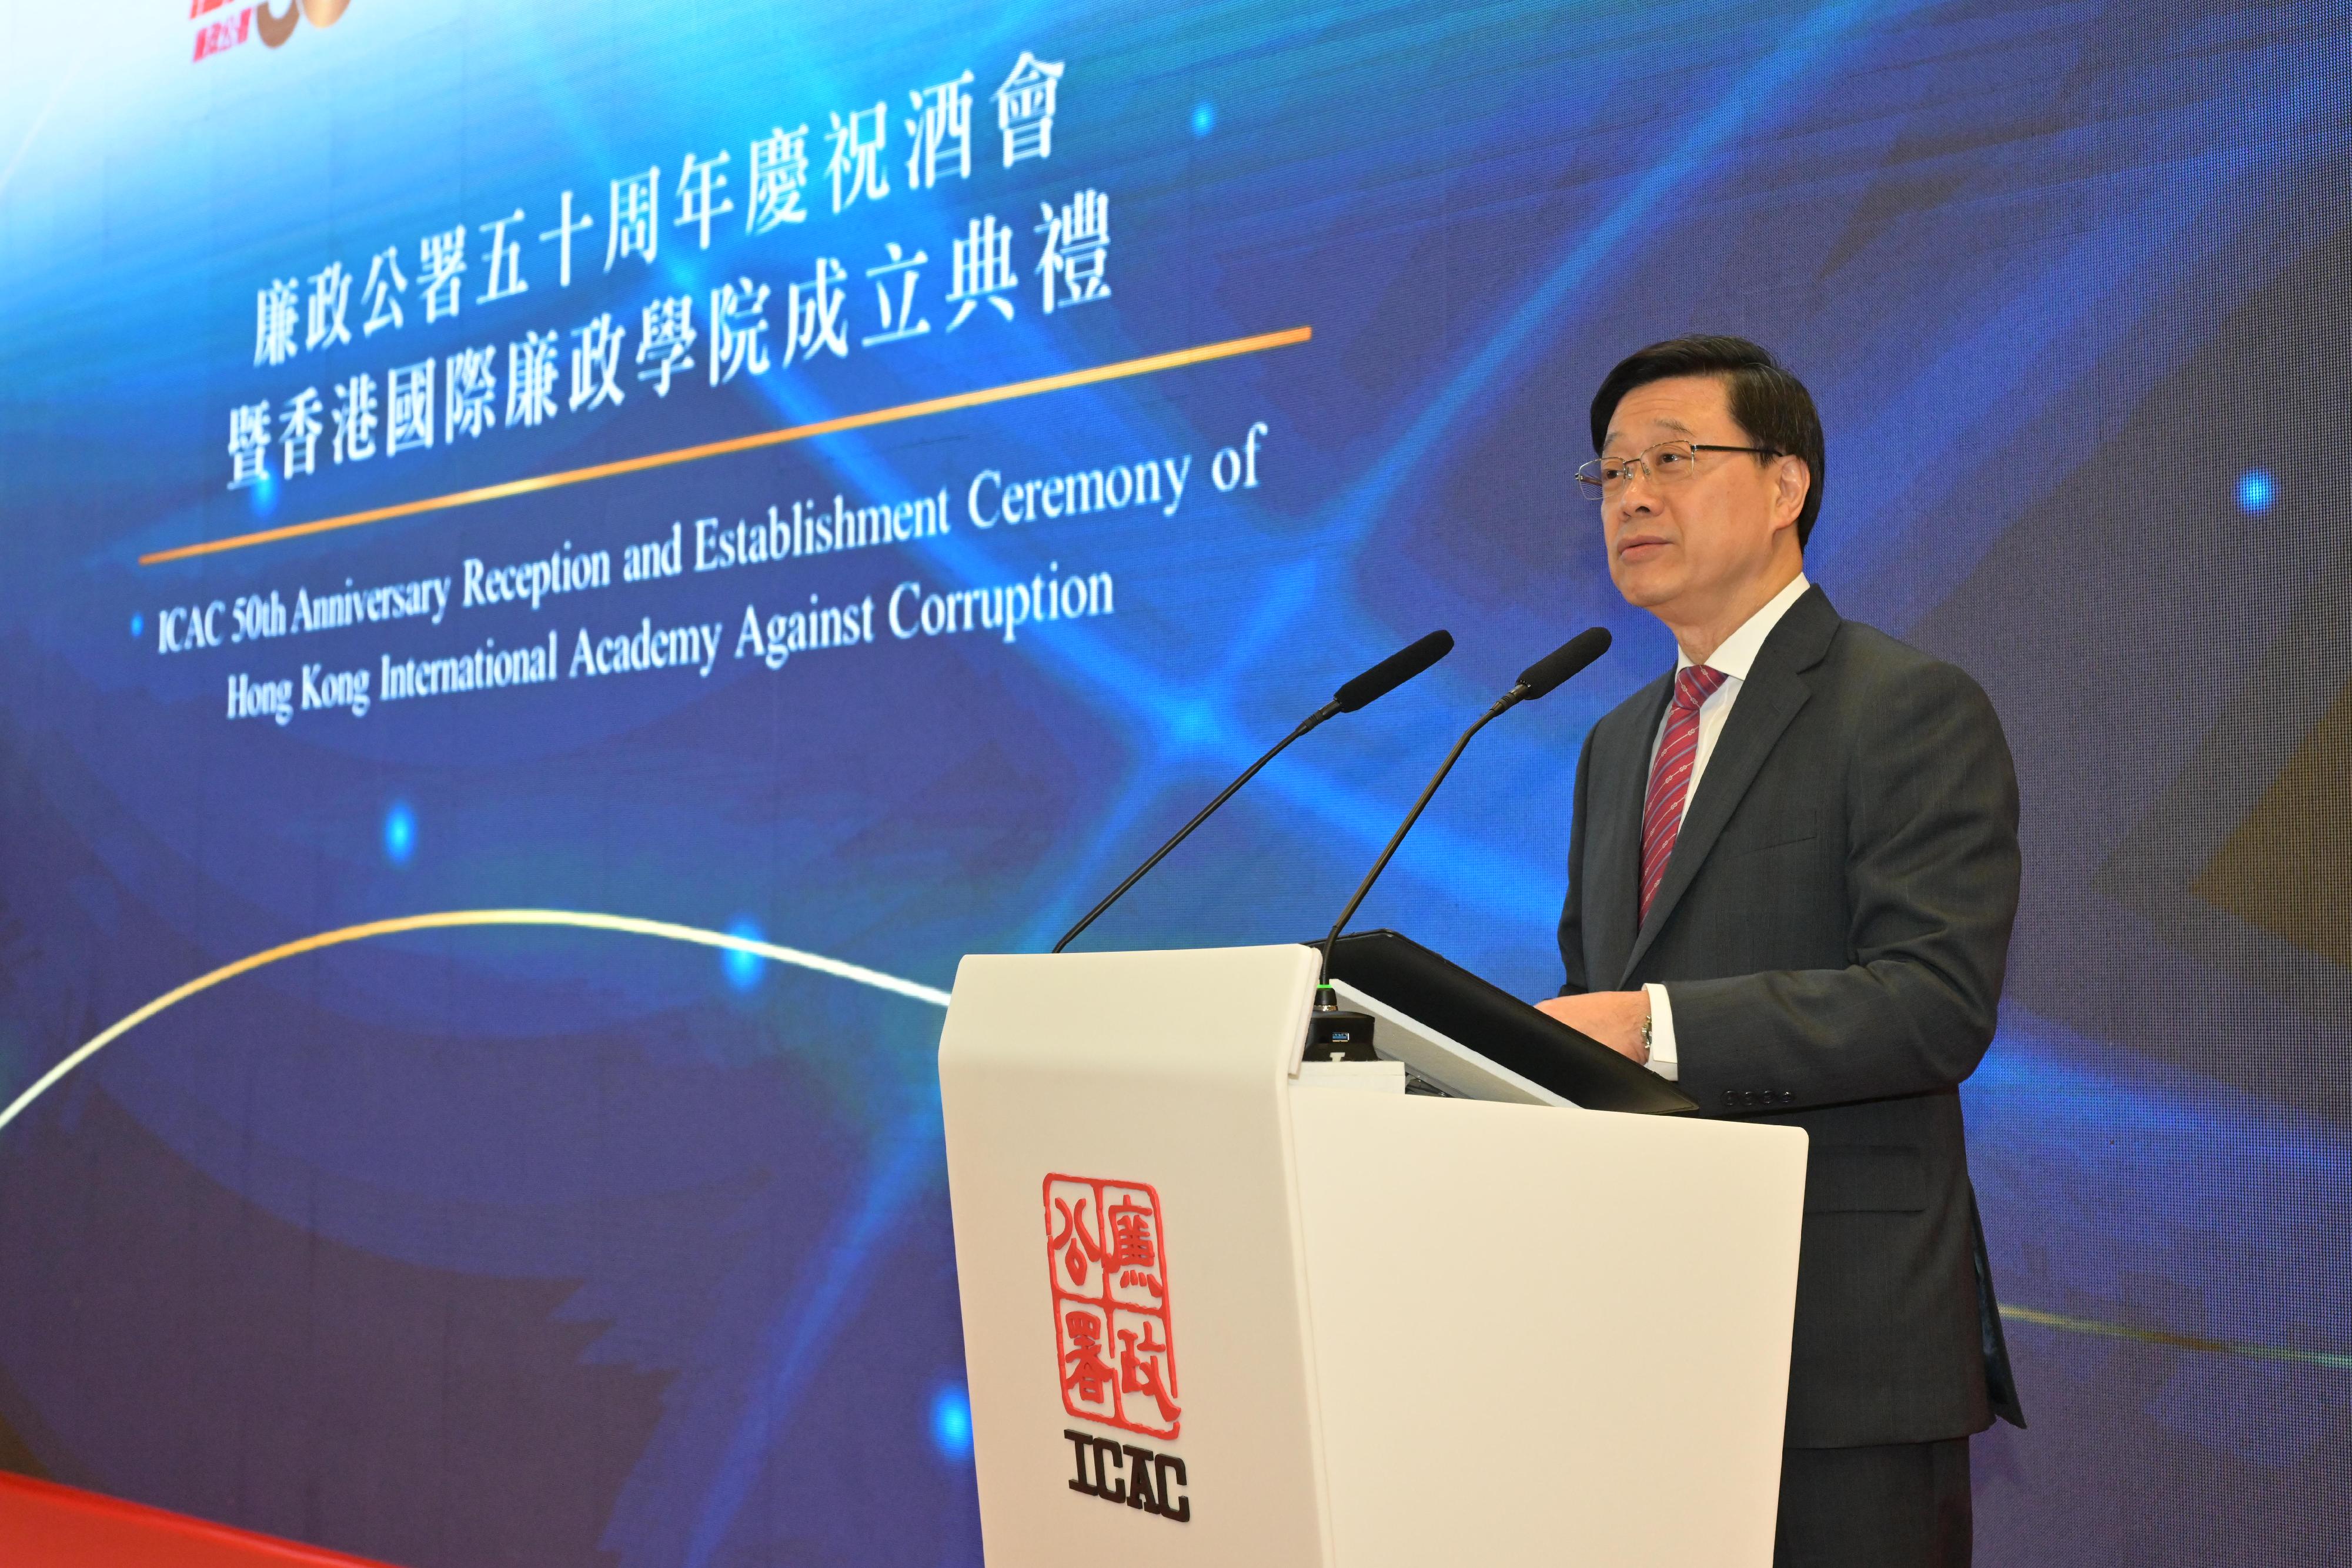 The Chief Executive, Mr John Lee, speaks at the ICAC (Independent Commission Against Corruption) 50th Anniversary Reception and Establishment Ceremony of Hong Kong International Academy Against Corruption today (February 21).